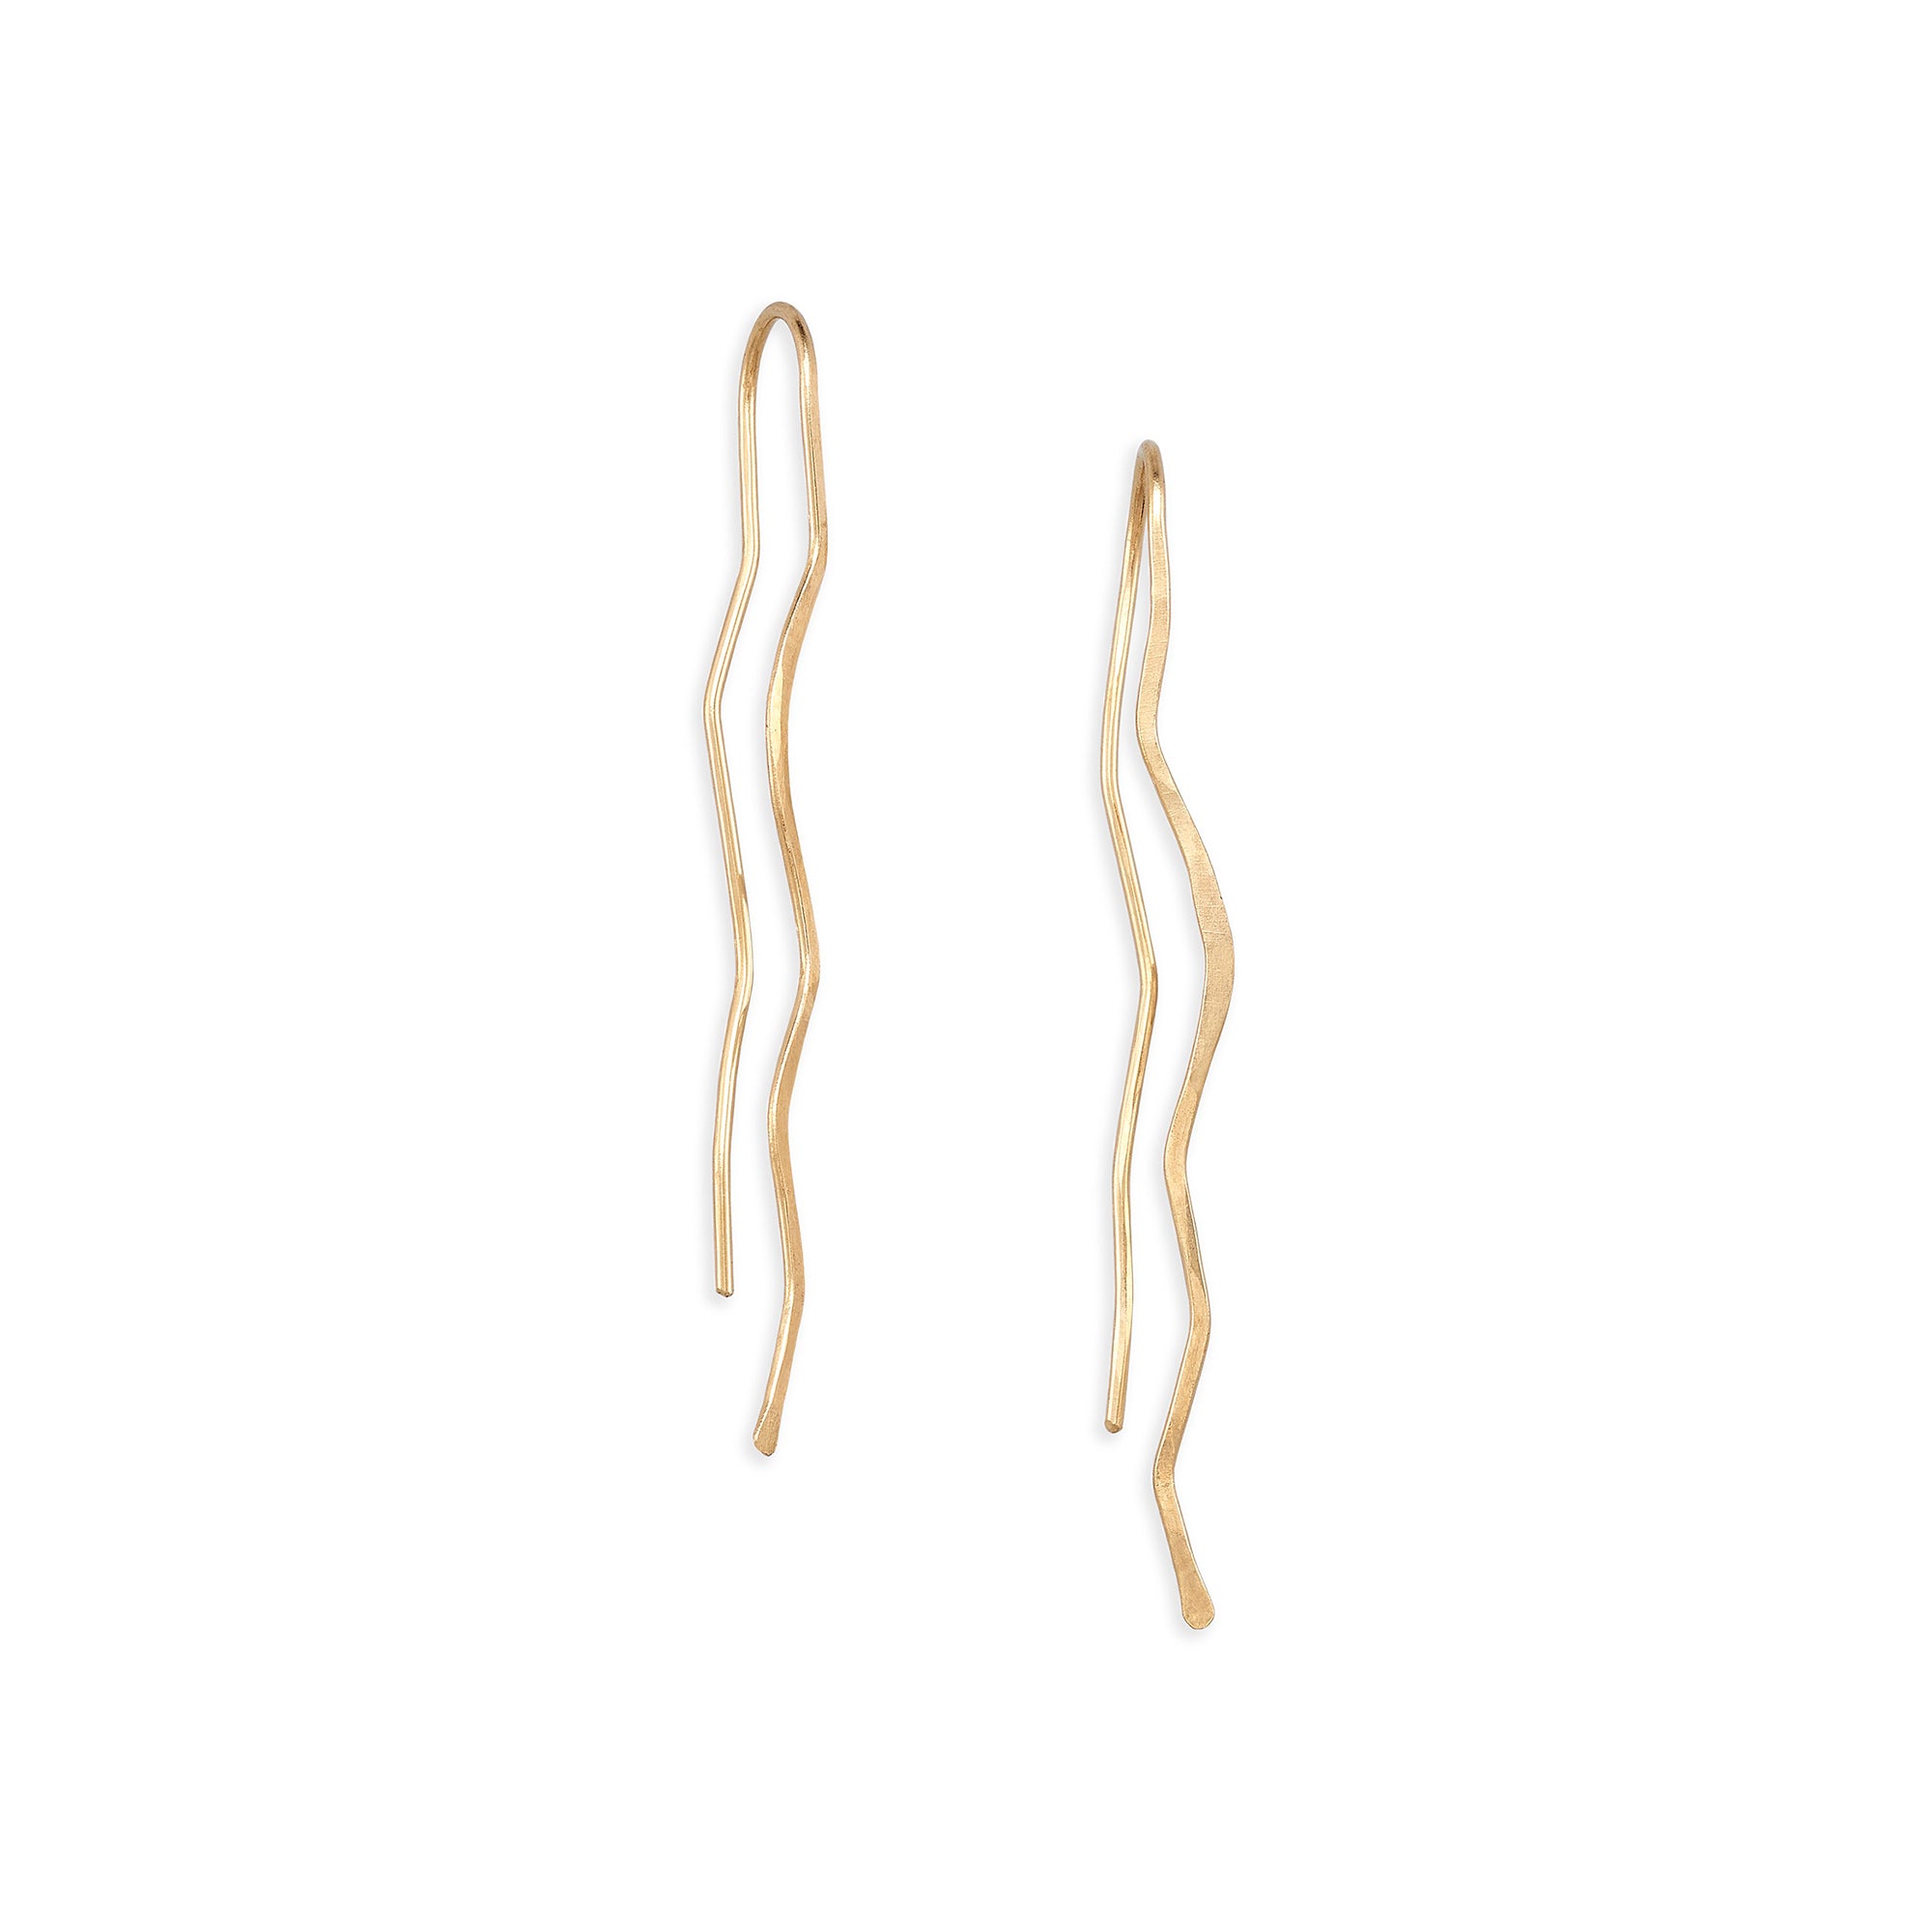 Kindness Moving Forward, Callen Thompson collaboration, 14k gold Buttress Hook Earrings